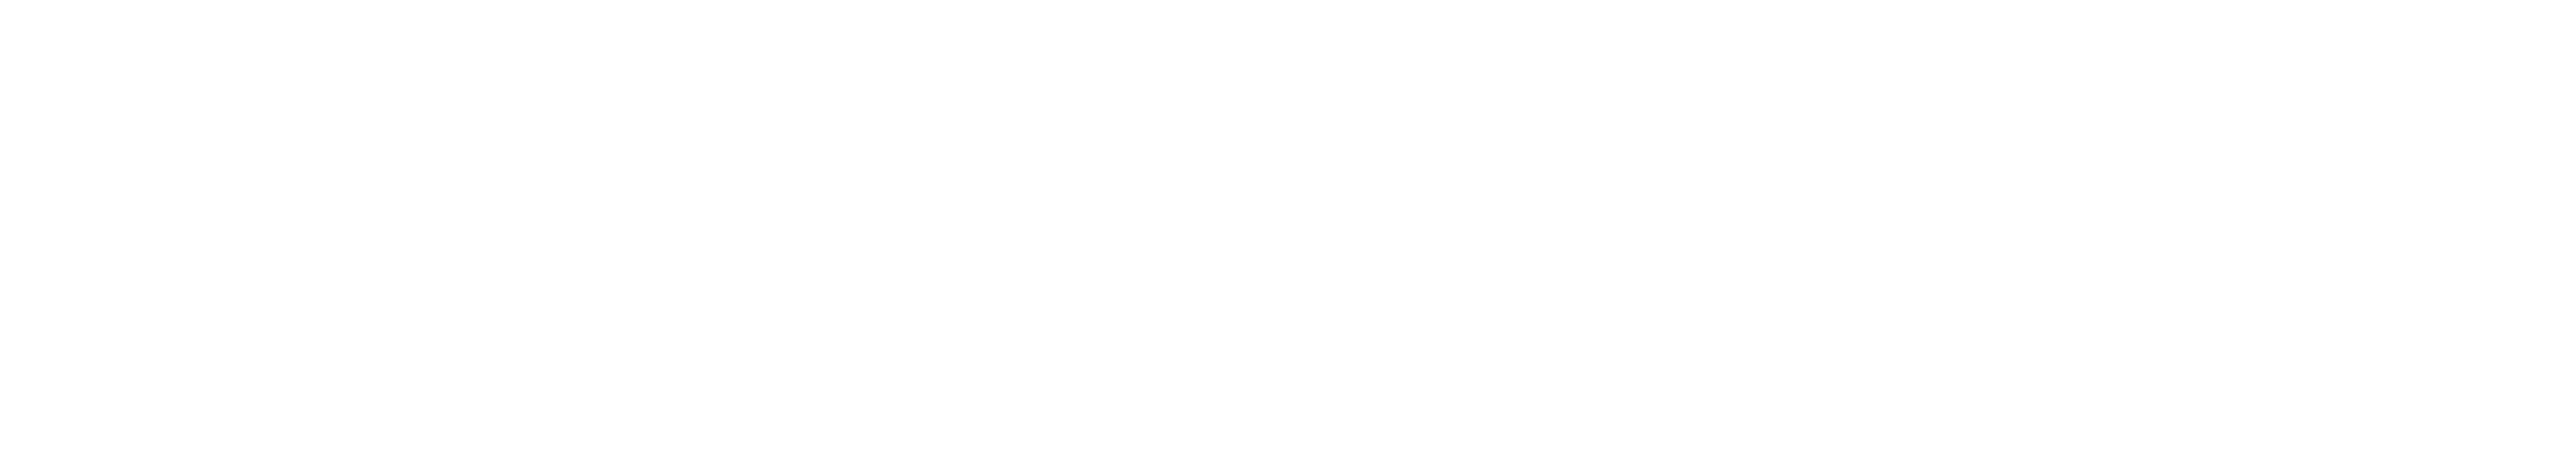 White Herefordshire College logo on a transparent background